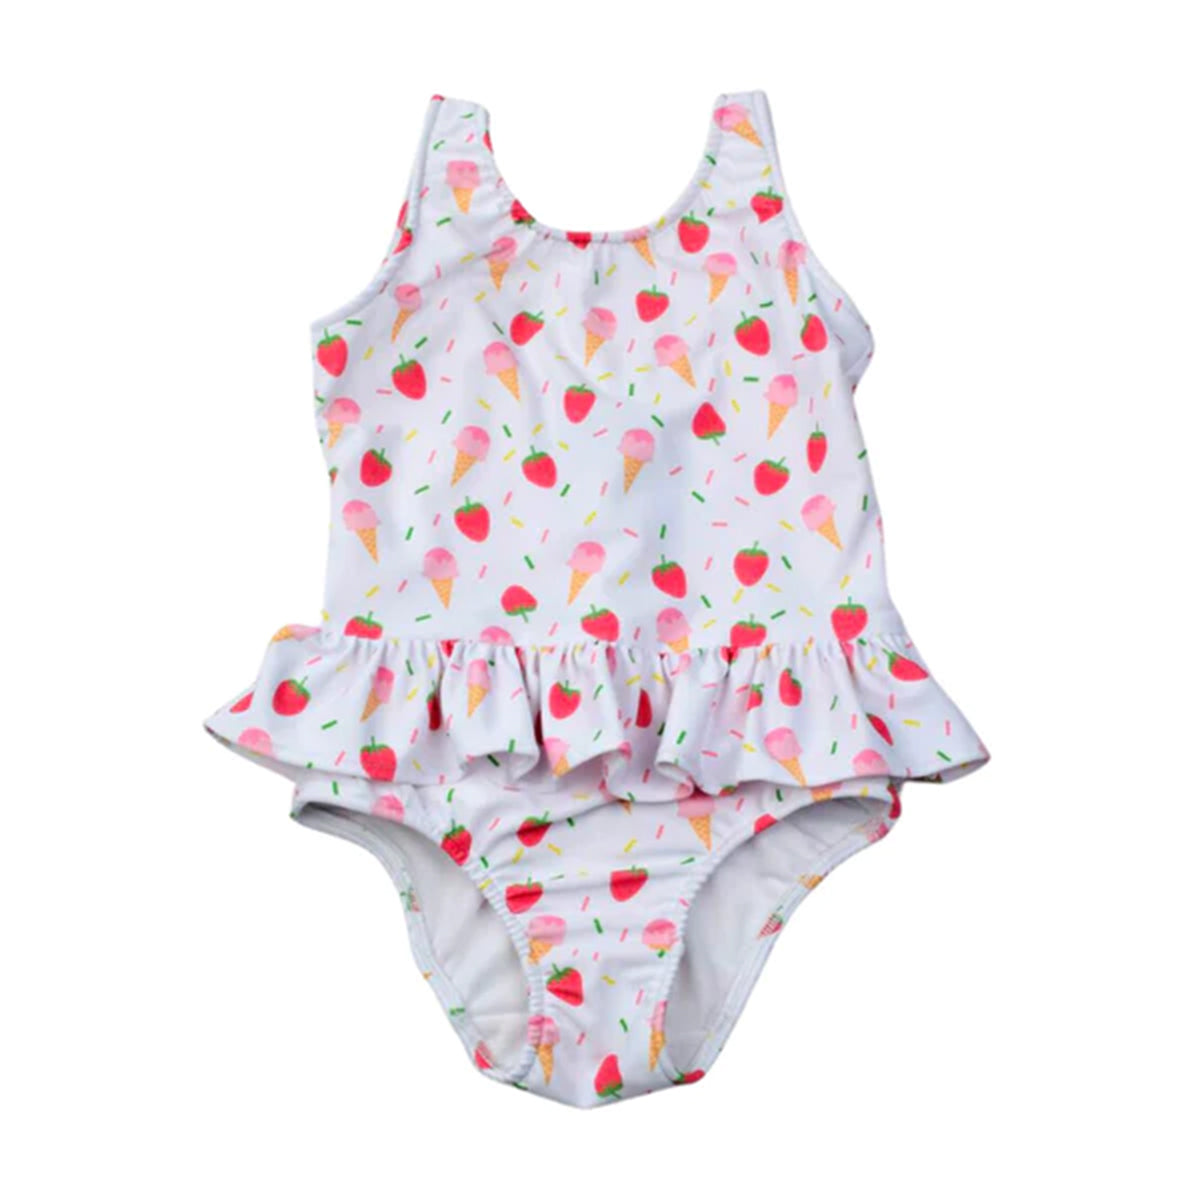 Strawberry Ice Cream Little Girl's One-Piece Swimsuit by Funtasia Too